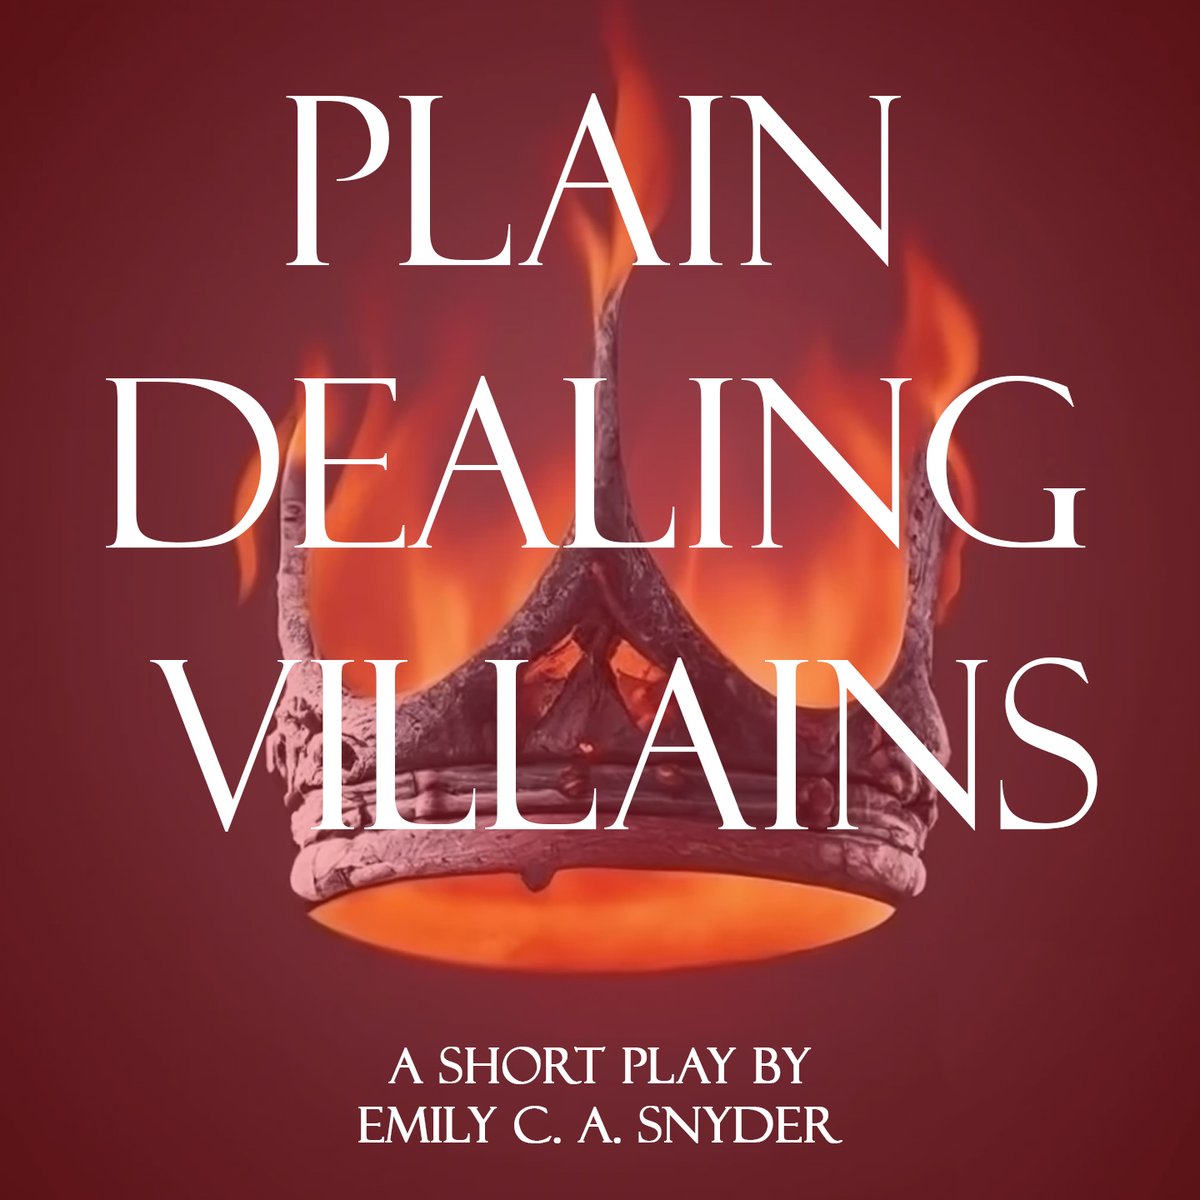 And moooar new plays!

PLAIN DEALING VILLAINS

Don John from 'Much Ado' approaches Macbeth about the best ways to...usurp a prince.  A short exploration of power dynamics.

newplayexchange.org/plays/3323448/…

#amwriting #Shakespeare #Macbeth #writingcommunity #newplay